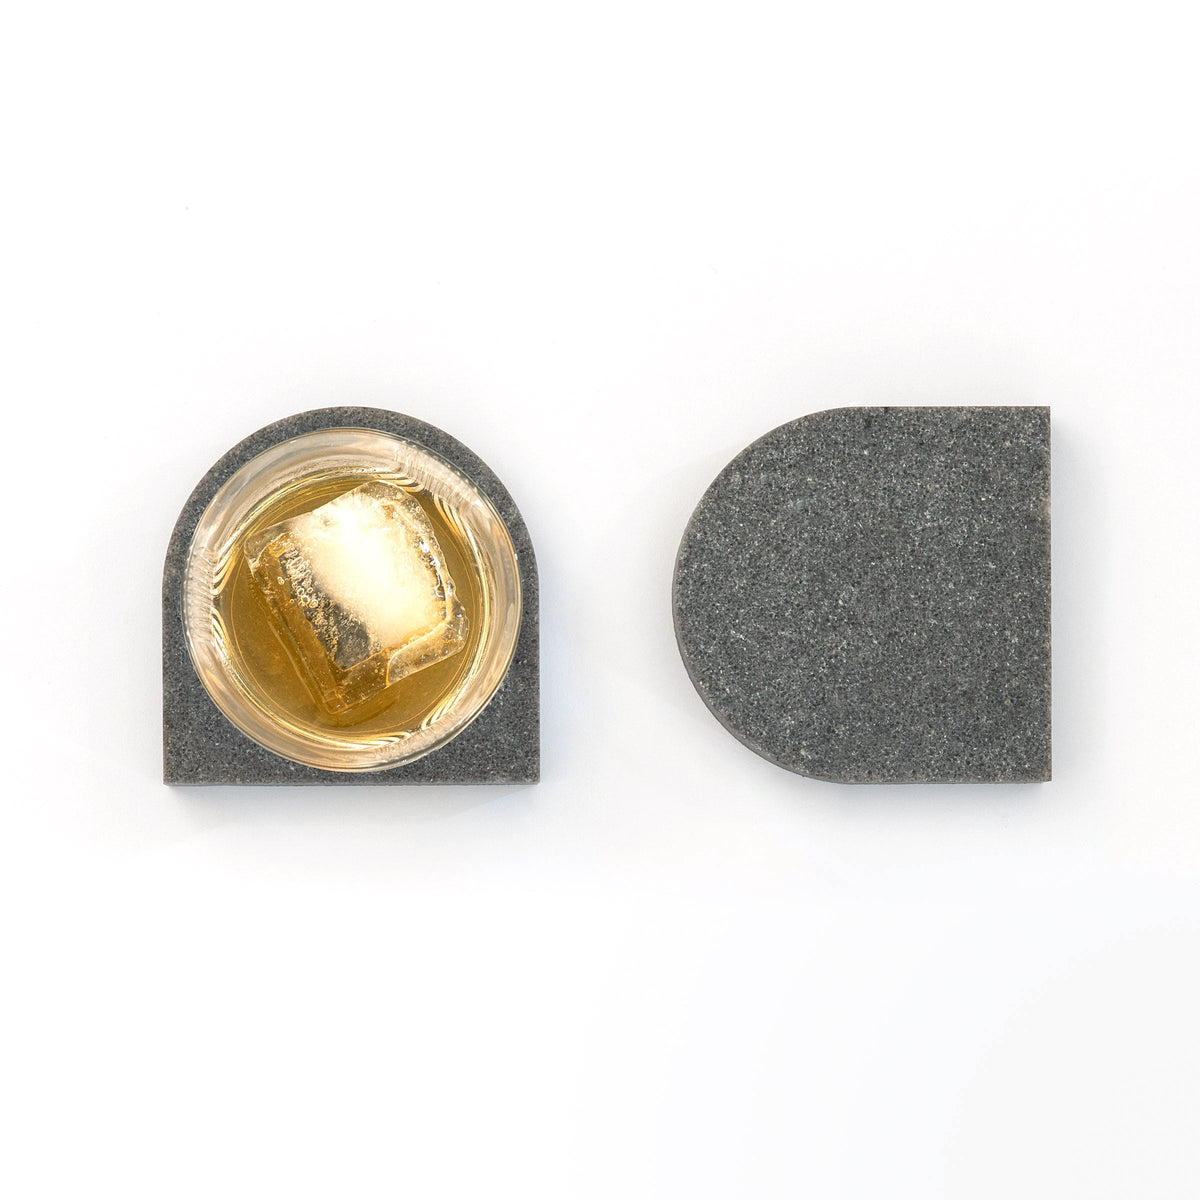  Quartz Arch Coaster™ Set 2 Piece in Rugged Concrete™. Quartz Rugged Concrete™ stone coasters in an arch shape. These dark grey quartz coasters have a cork backing. white and grey marble coasters in appearance however quartz has greater scratch resistance and is lower maintenance. caesarstone quartz  